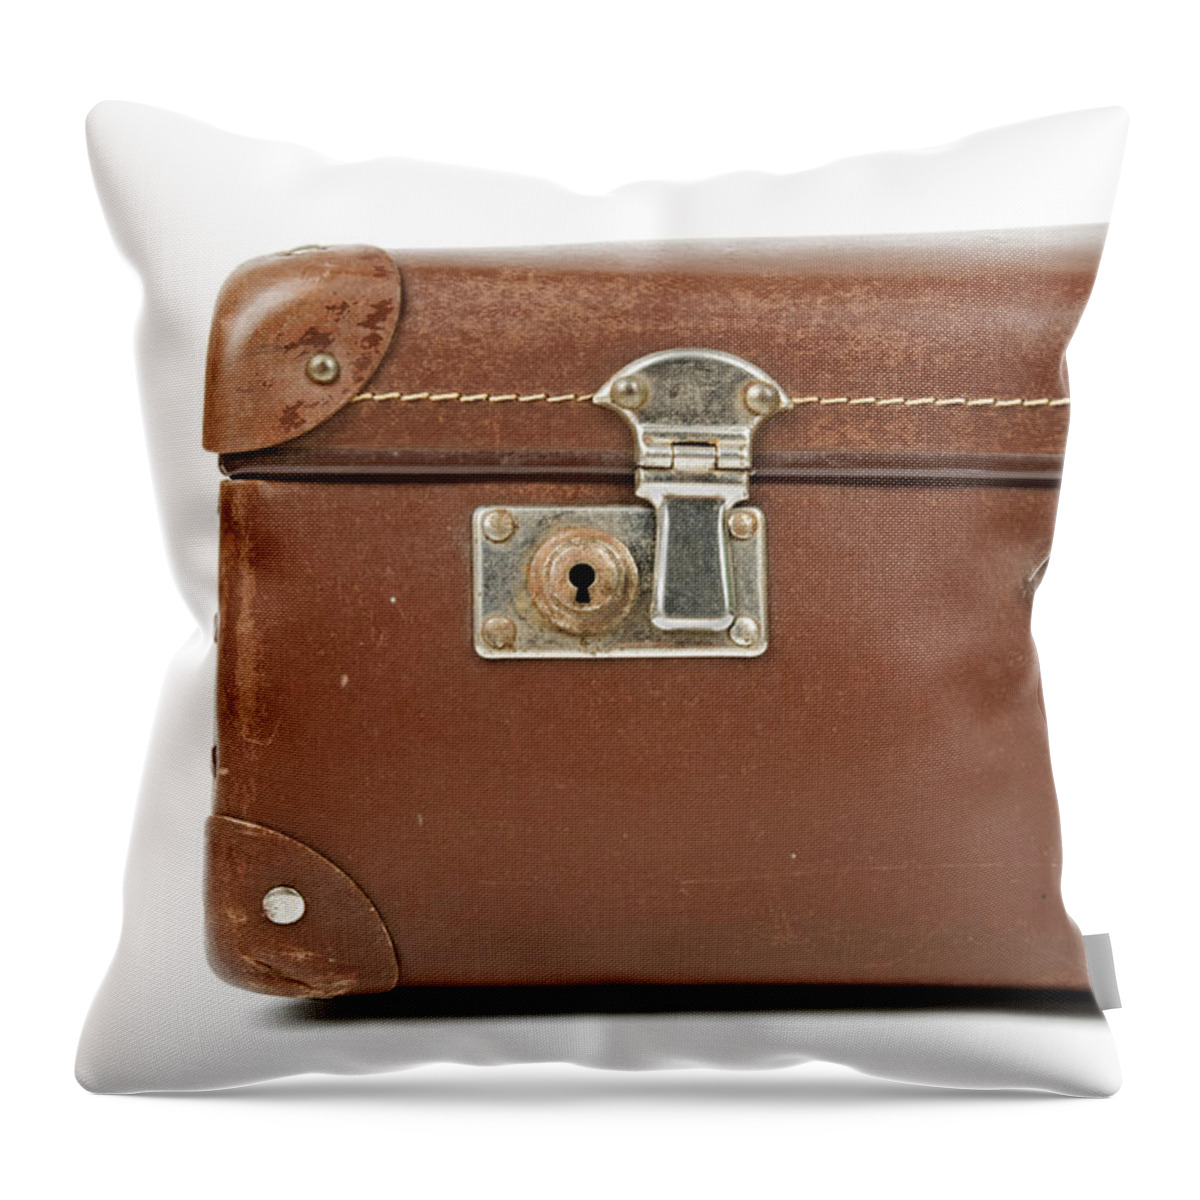 Luggage Throw Pillow featuring the photograph Suitcase by Chevy Fleet